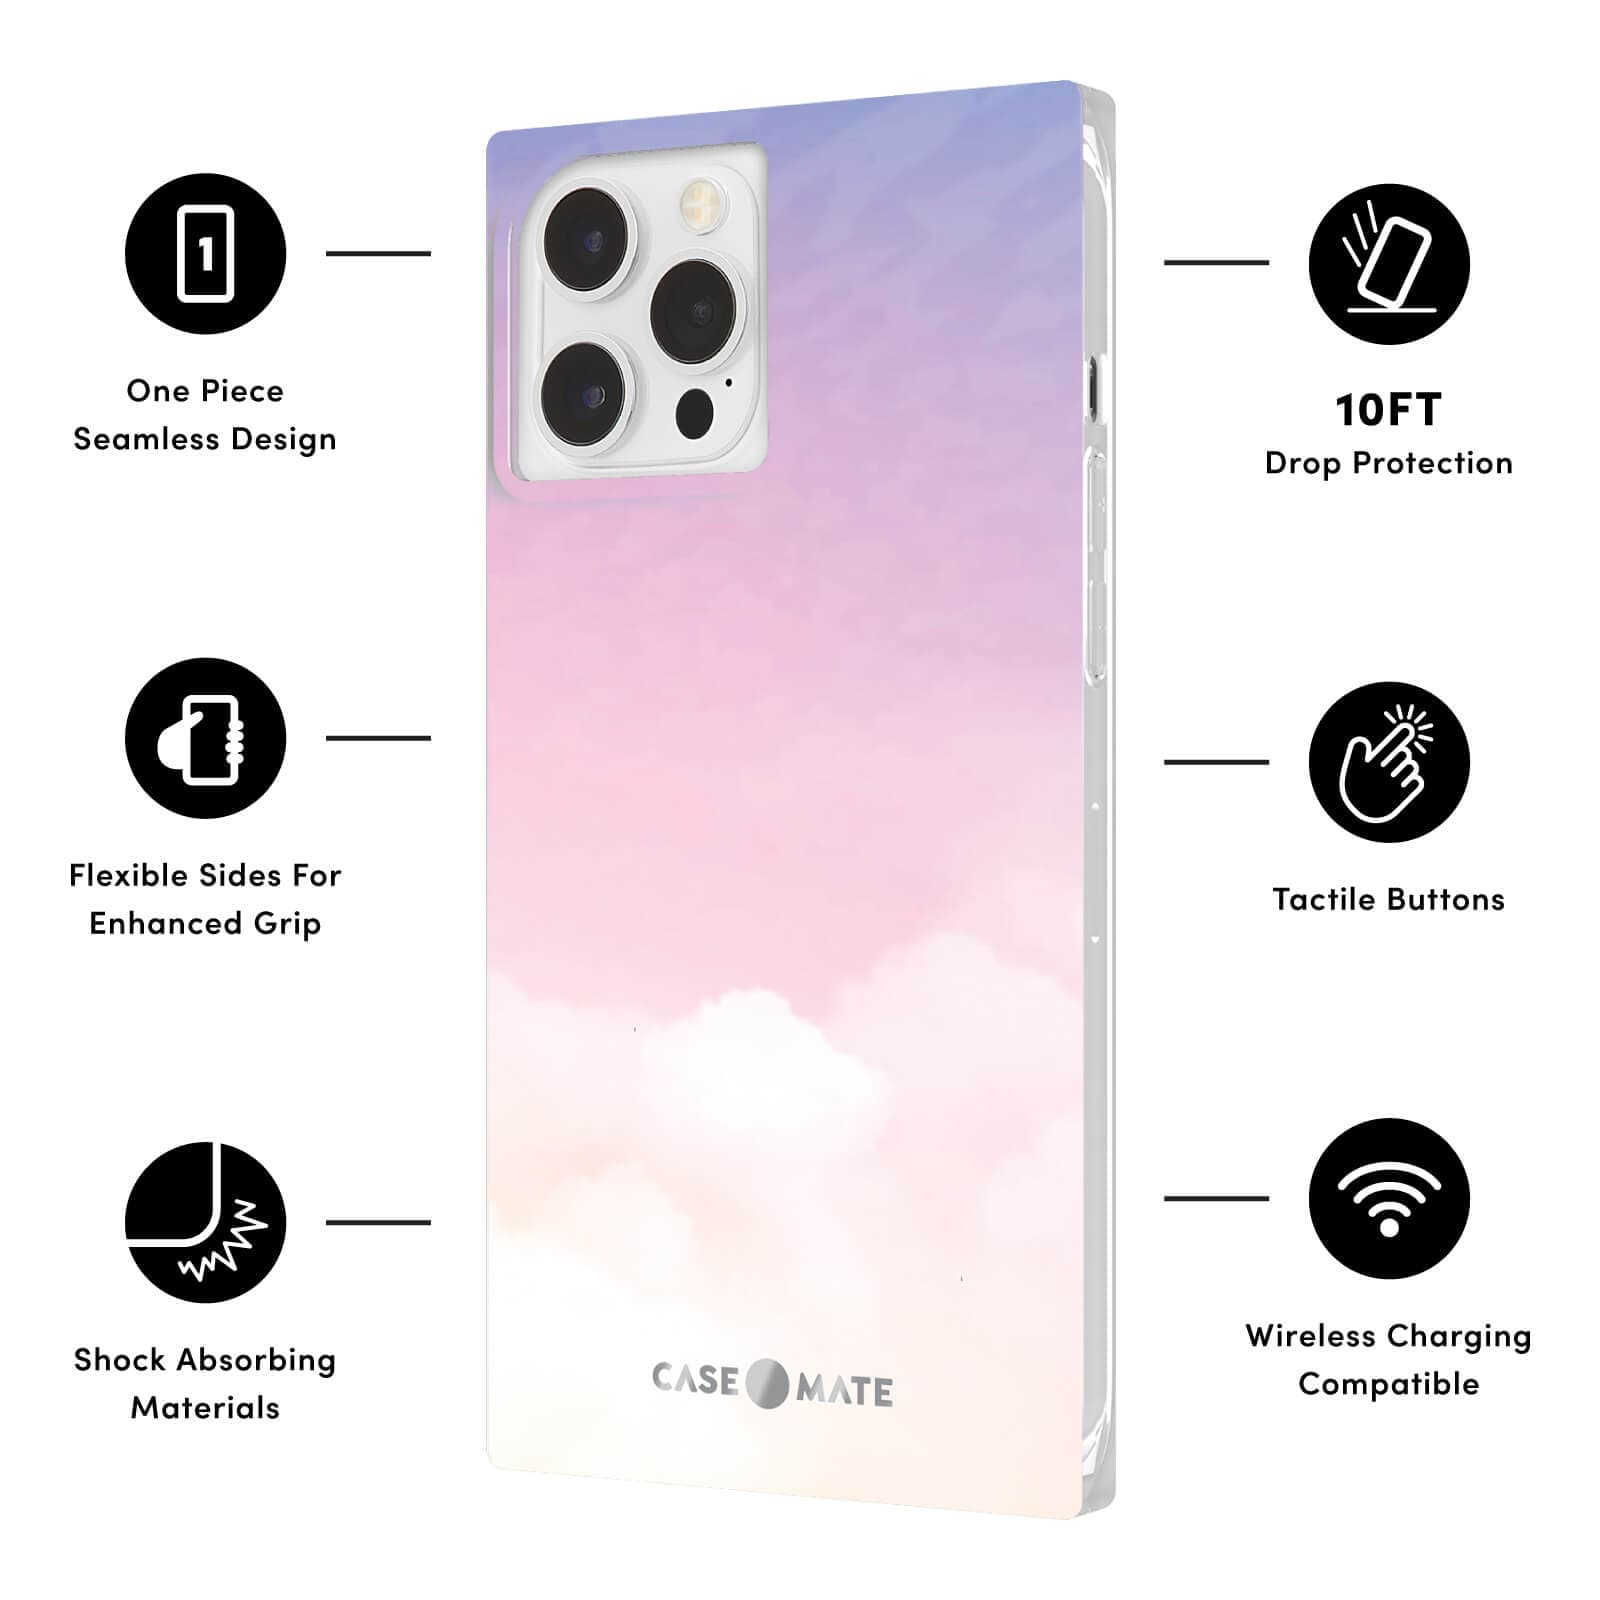 Features One Piece Seamless Design, Flexible Sides for Enhanced Grip, Shock Absorbing Materials, 10 ft Drop Protection, Tactile Buttons, Wireless Charging Compatible. color::Clouds